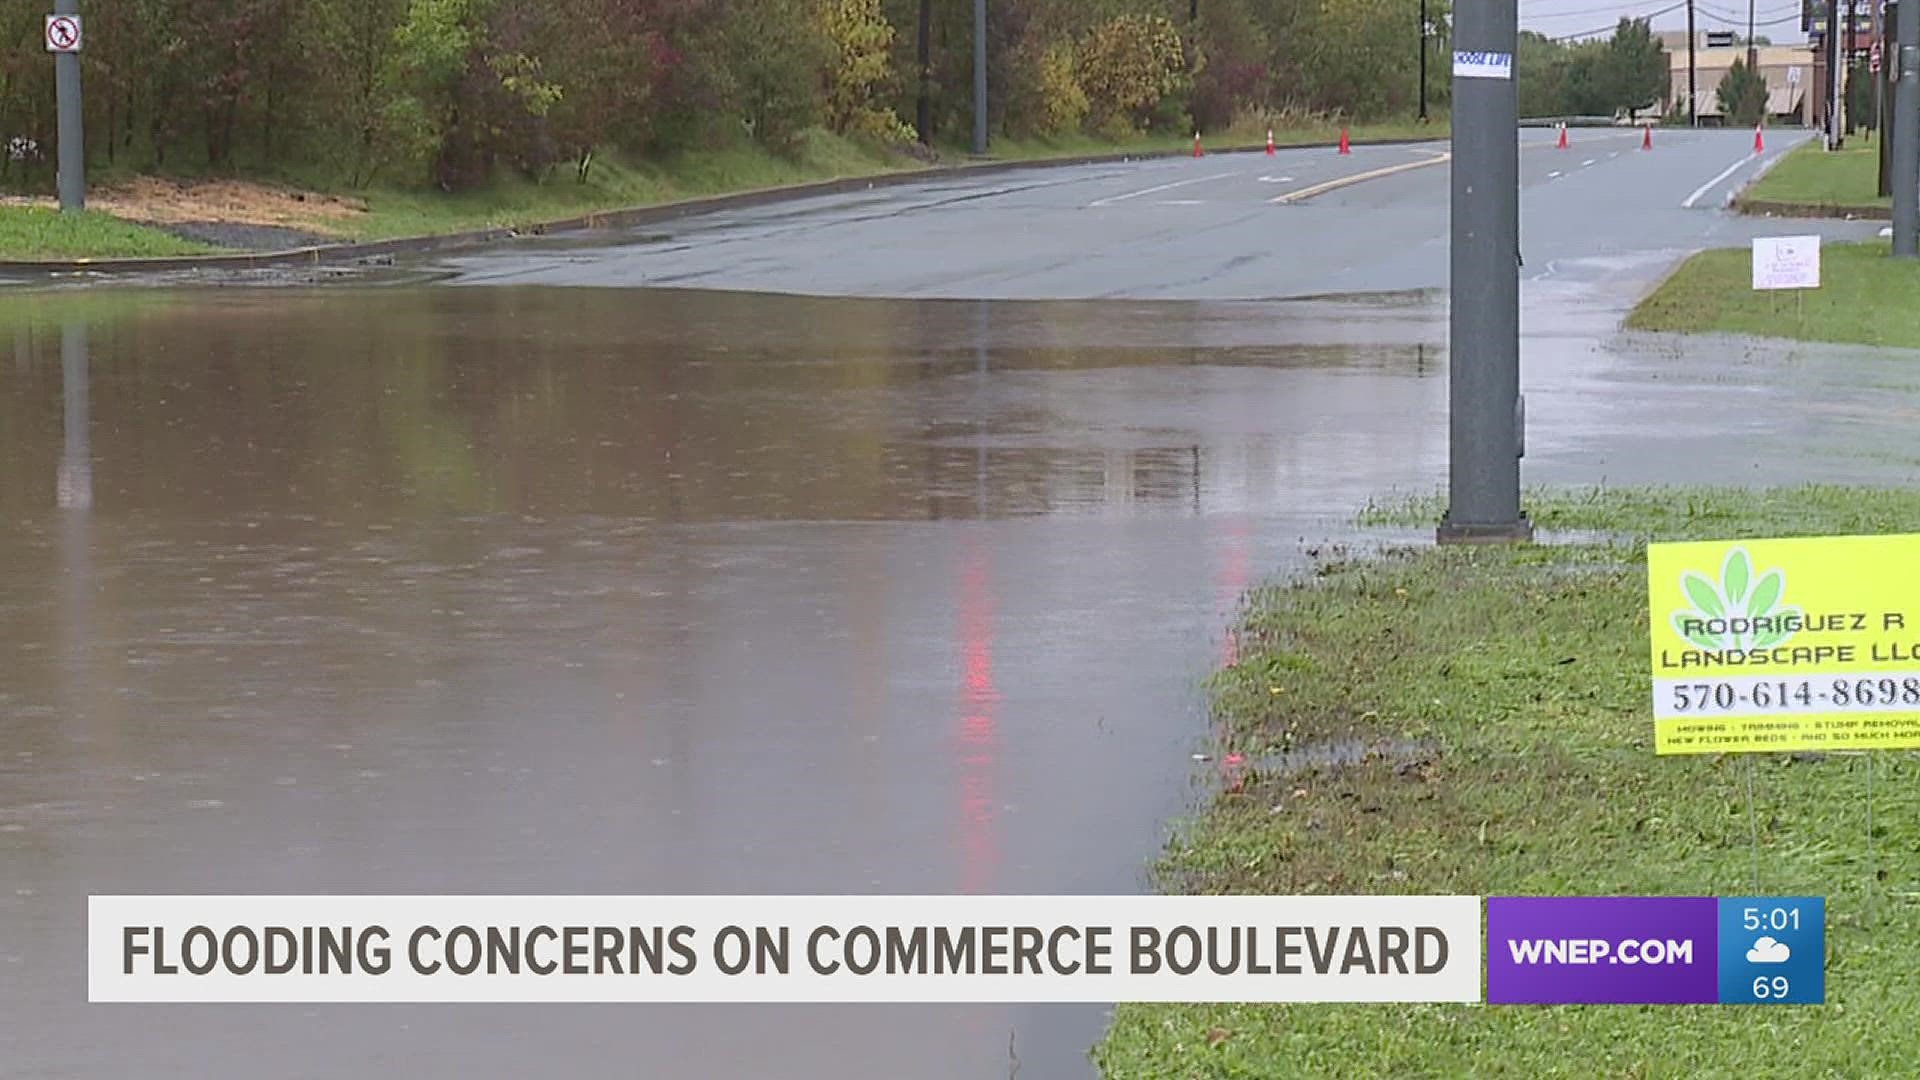 Drainage issues closed Commerce Boulevard after heavy rainfall, and people are frustrated that nothing has been done to fix the problem.